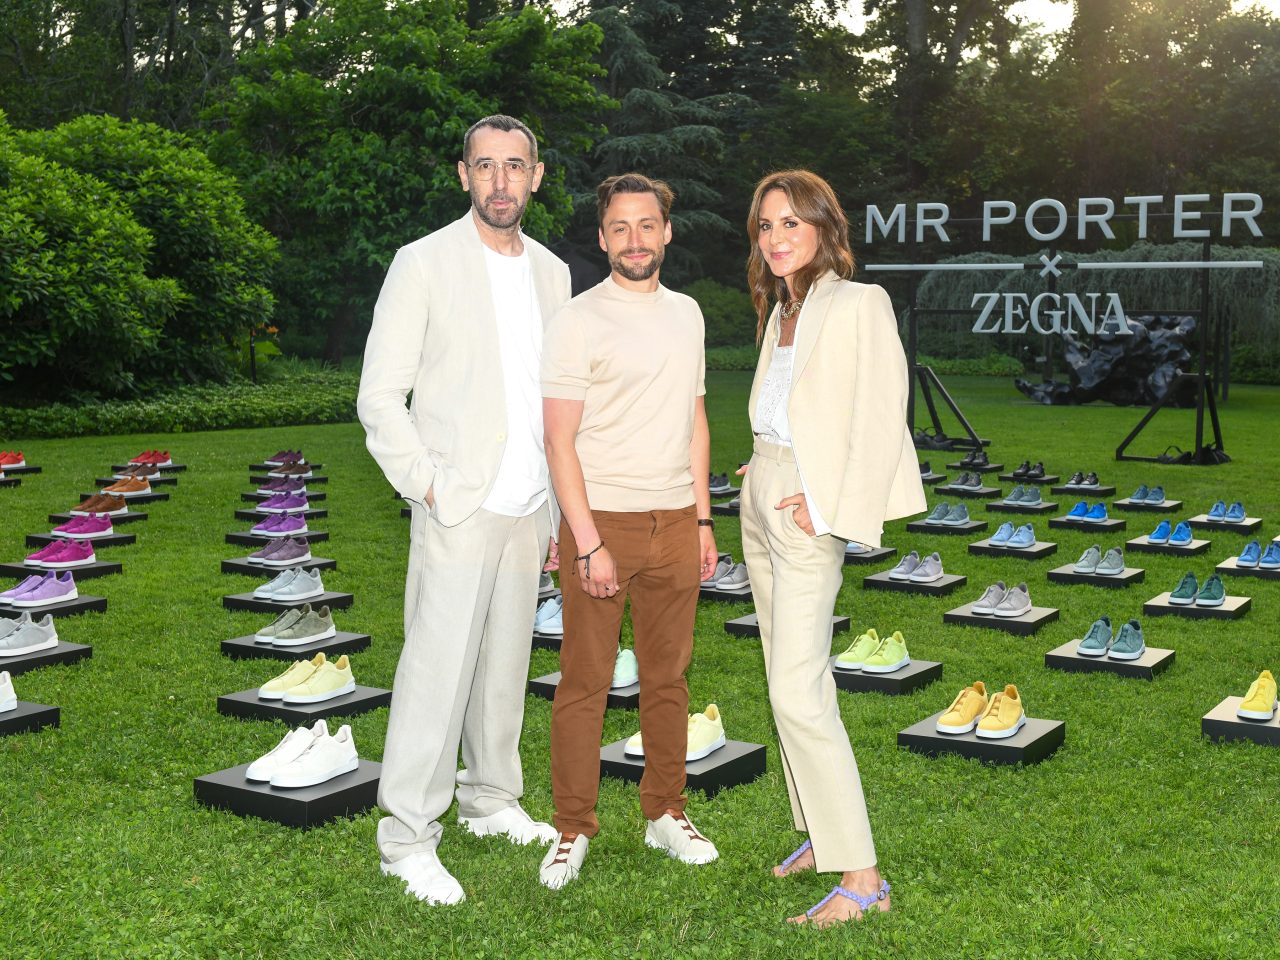 Zegna and Mr Porter Kick Off July 4th Weekend in East Hampton